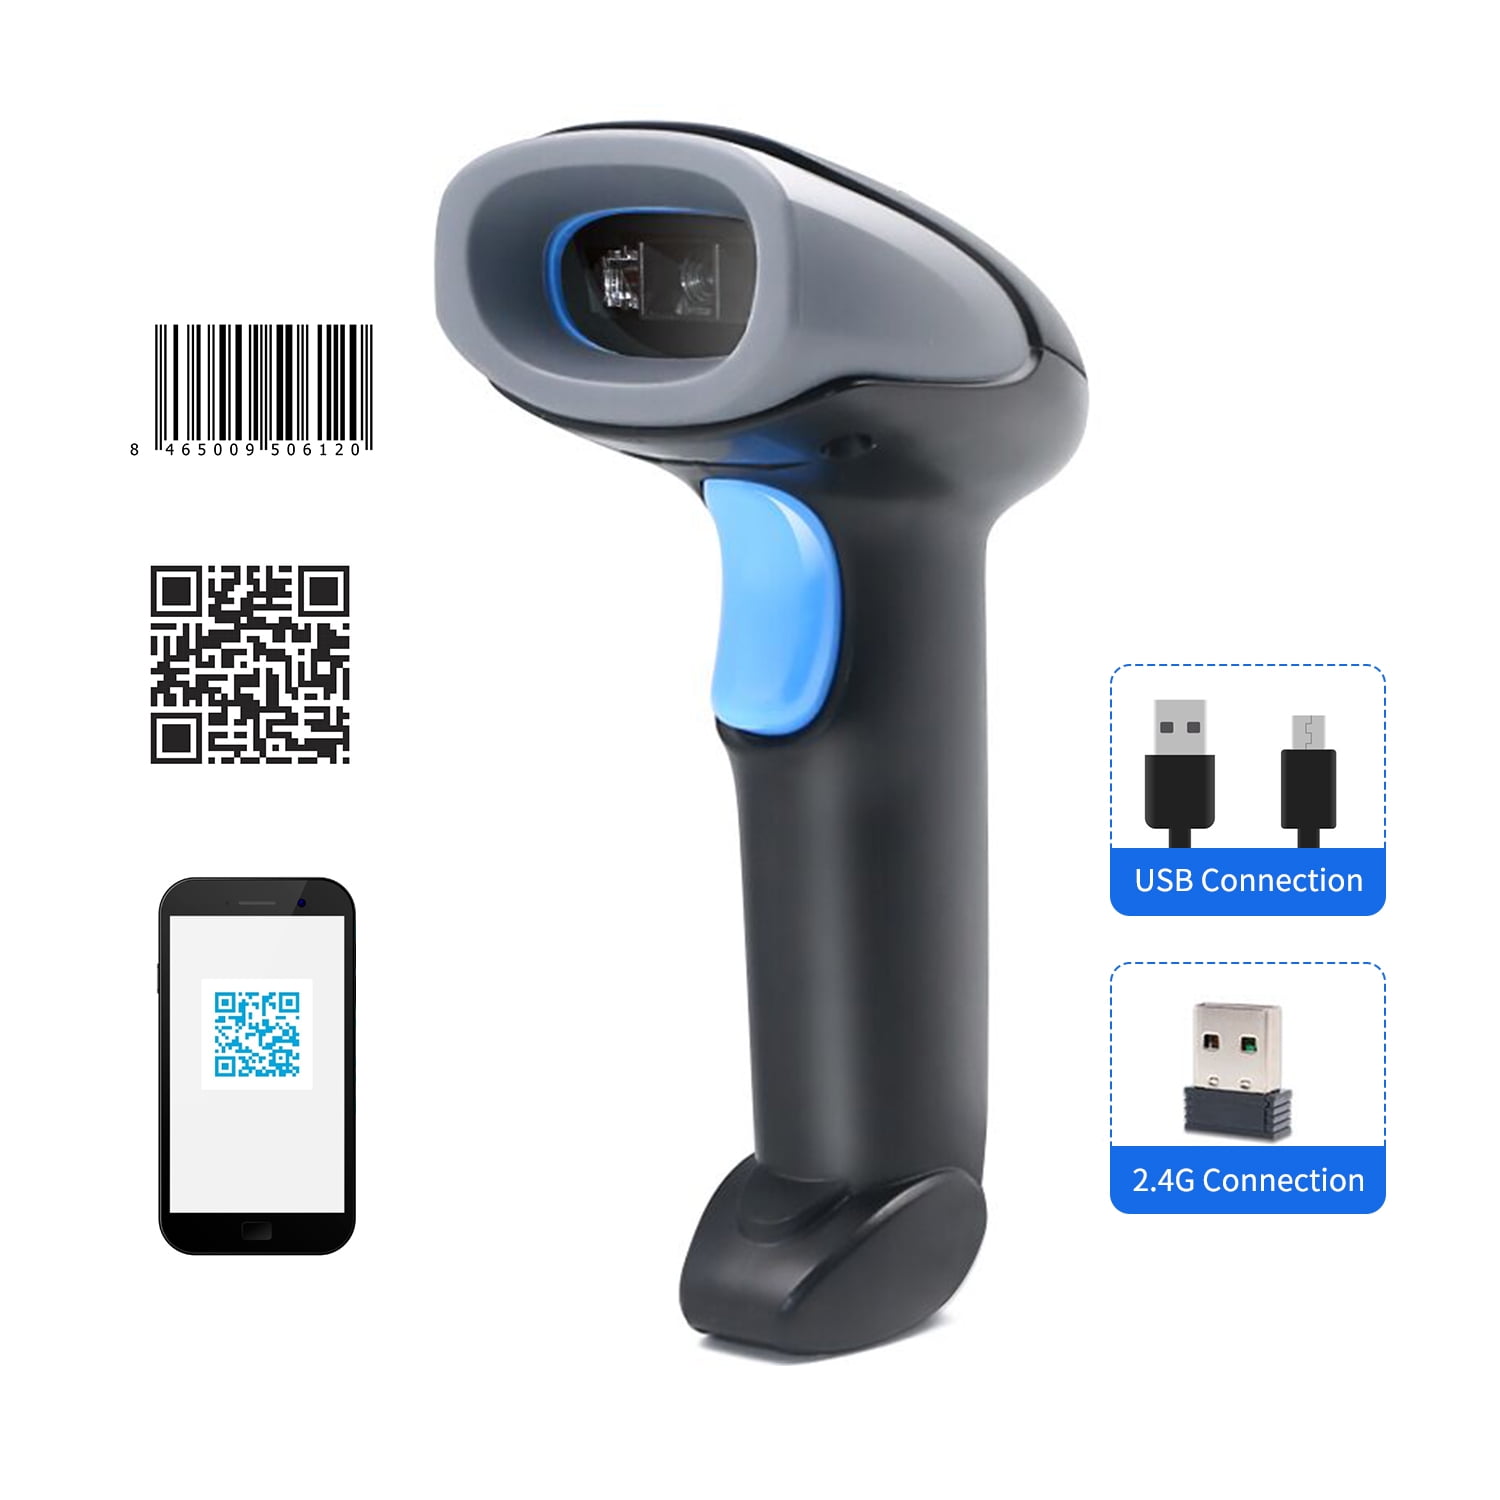 Handheld-Barcode-Scanner Laser 1D 2D QR Wired Continuous Barcode Reader USB 